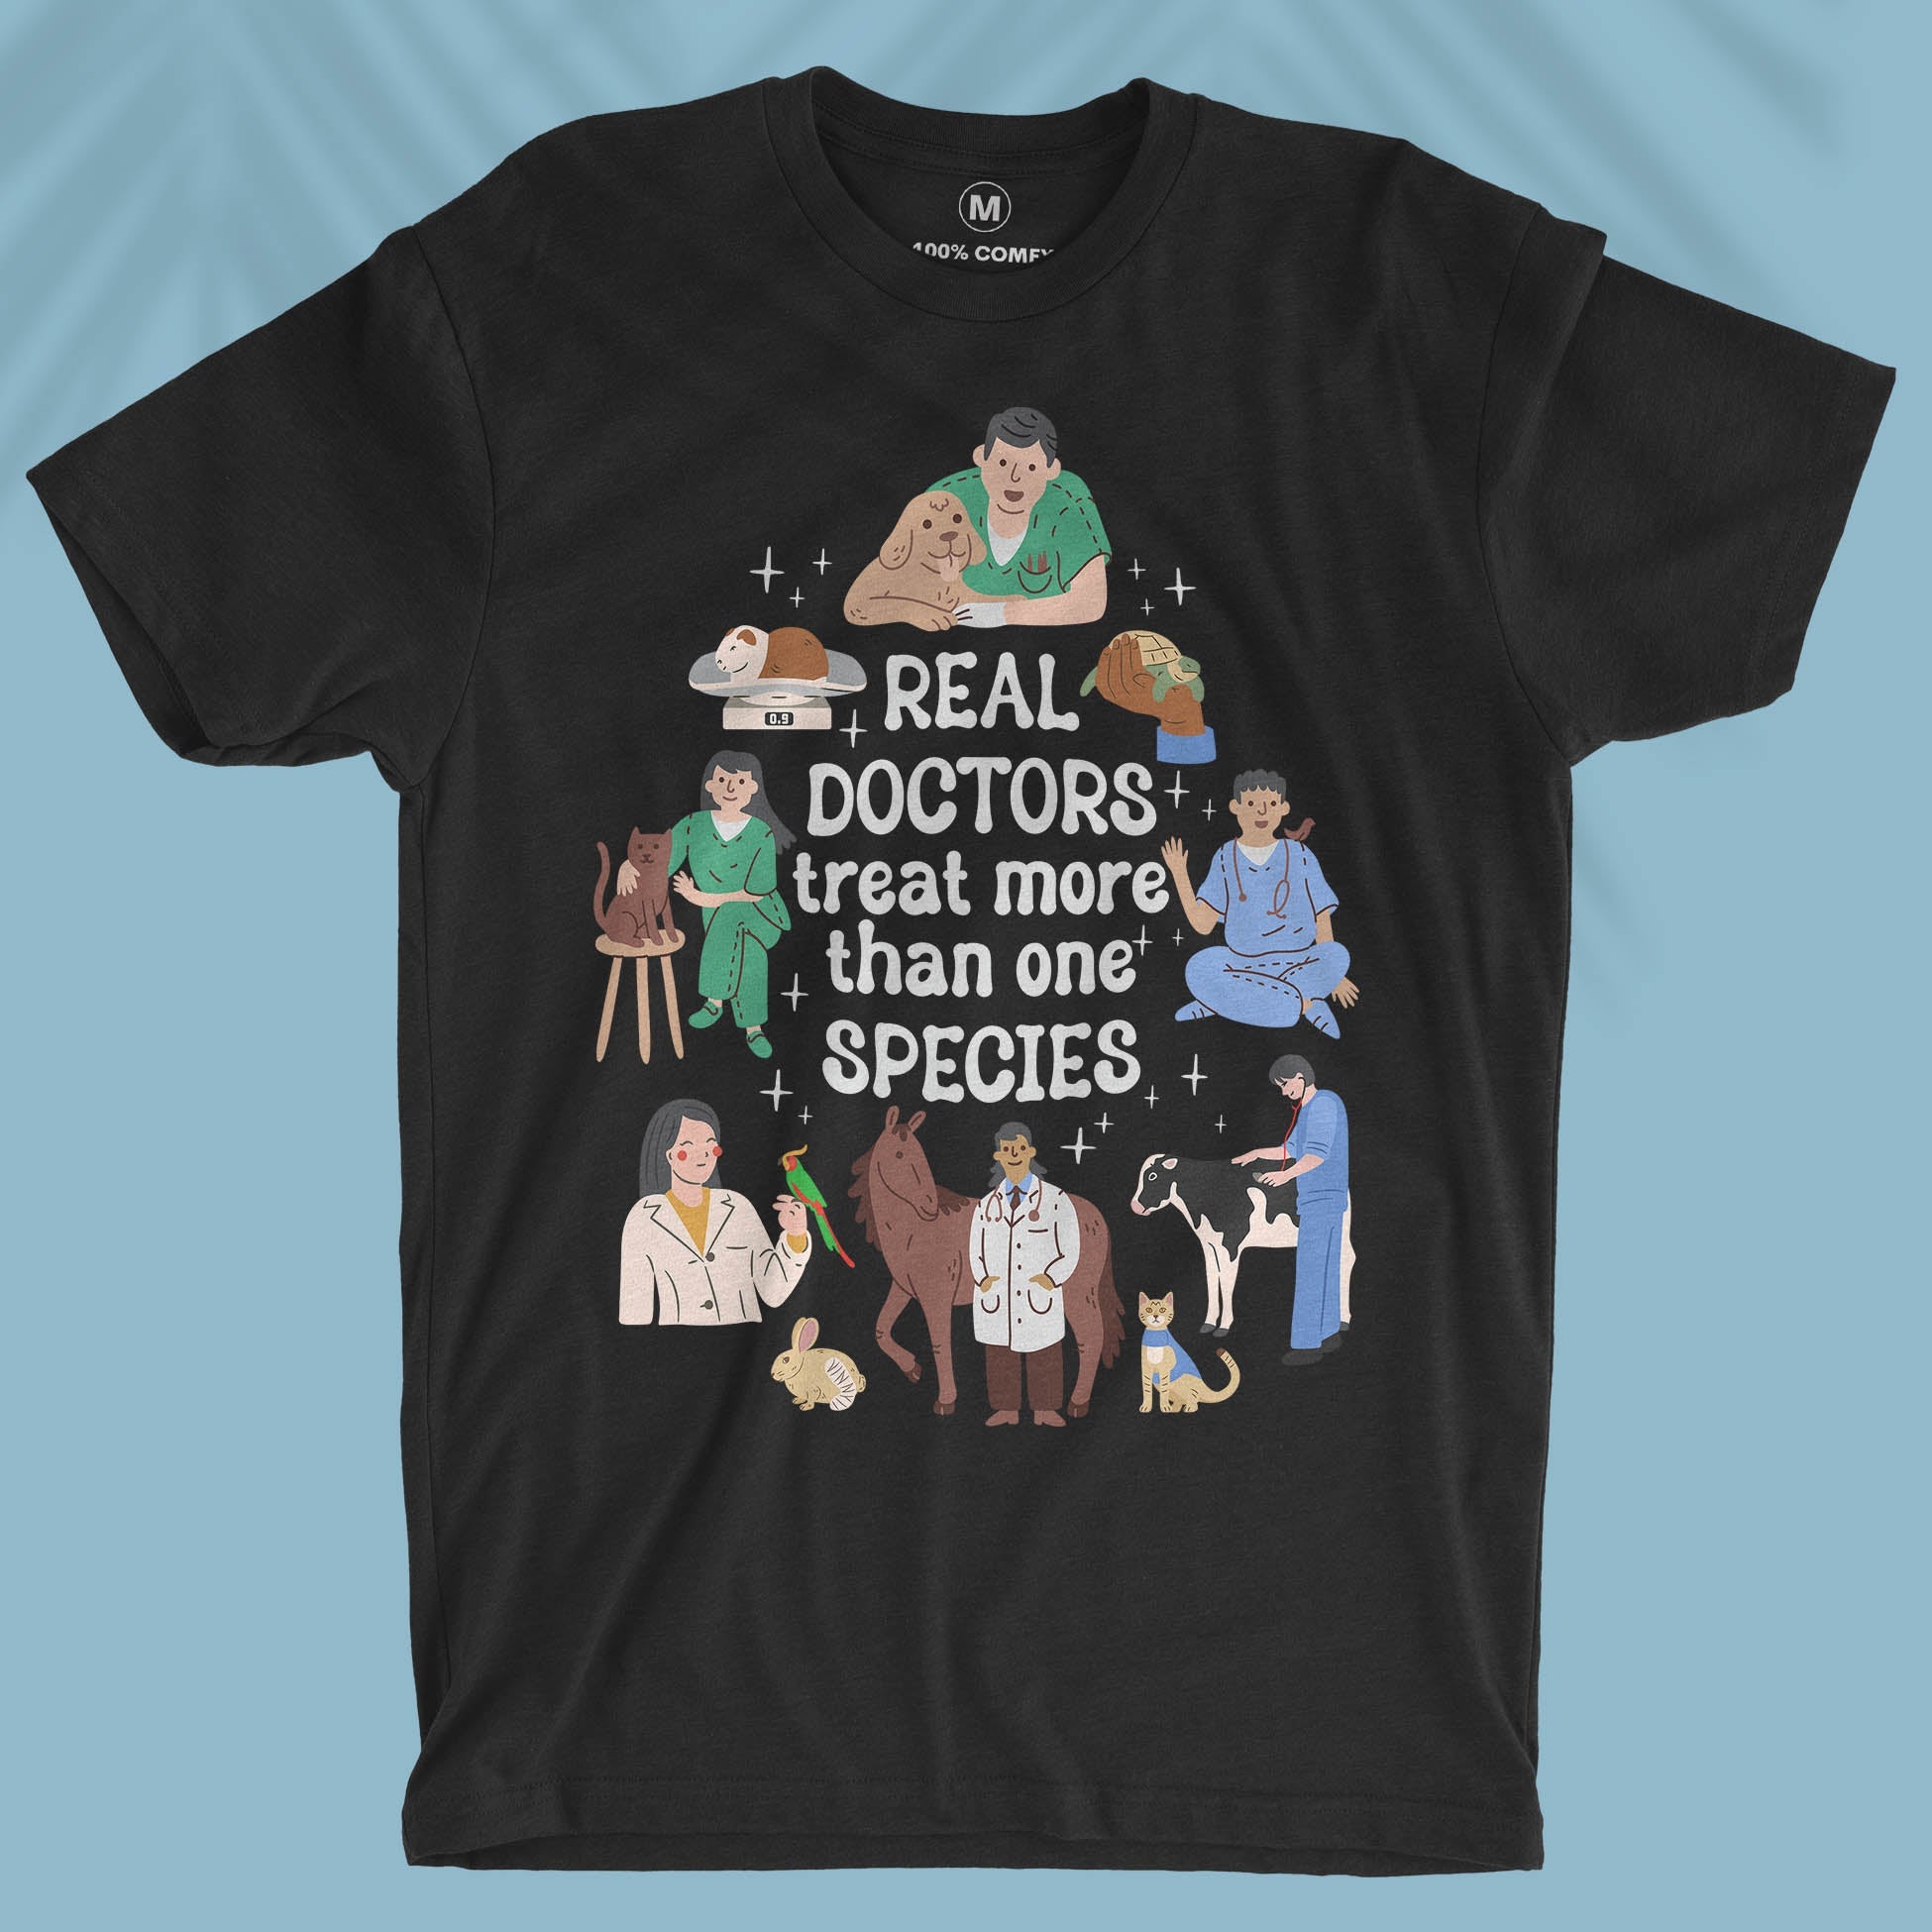 Real Doctors Treat More Than One Species - Unisex T-shirt